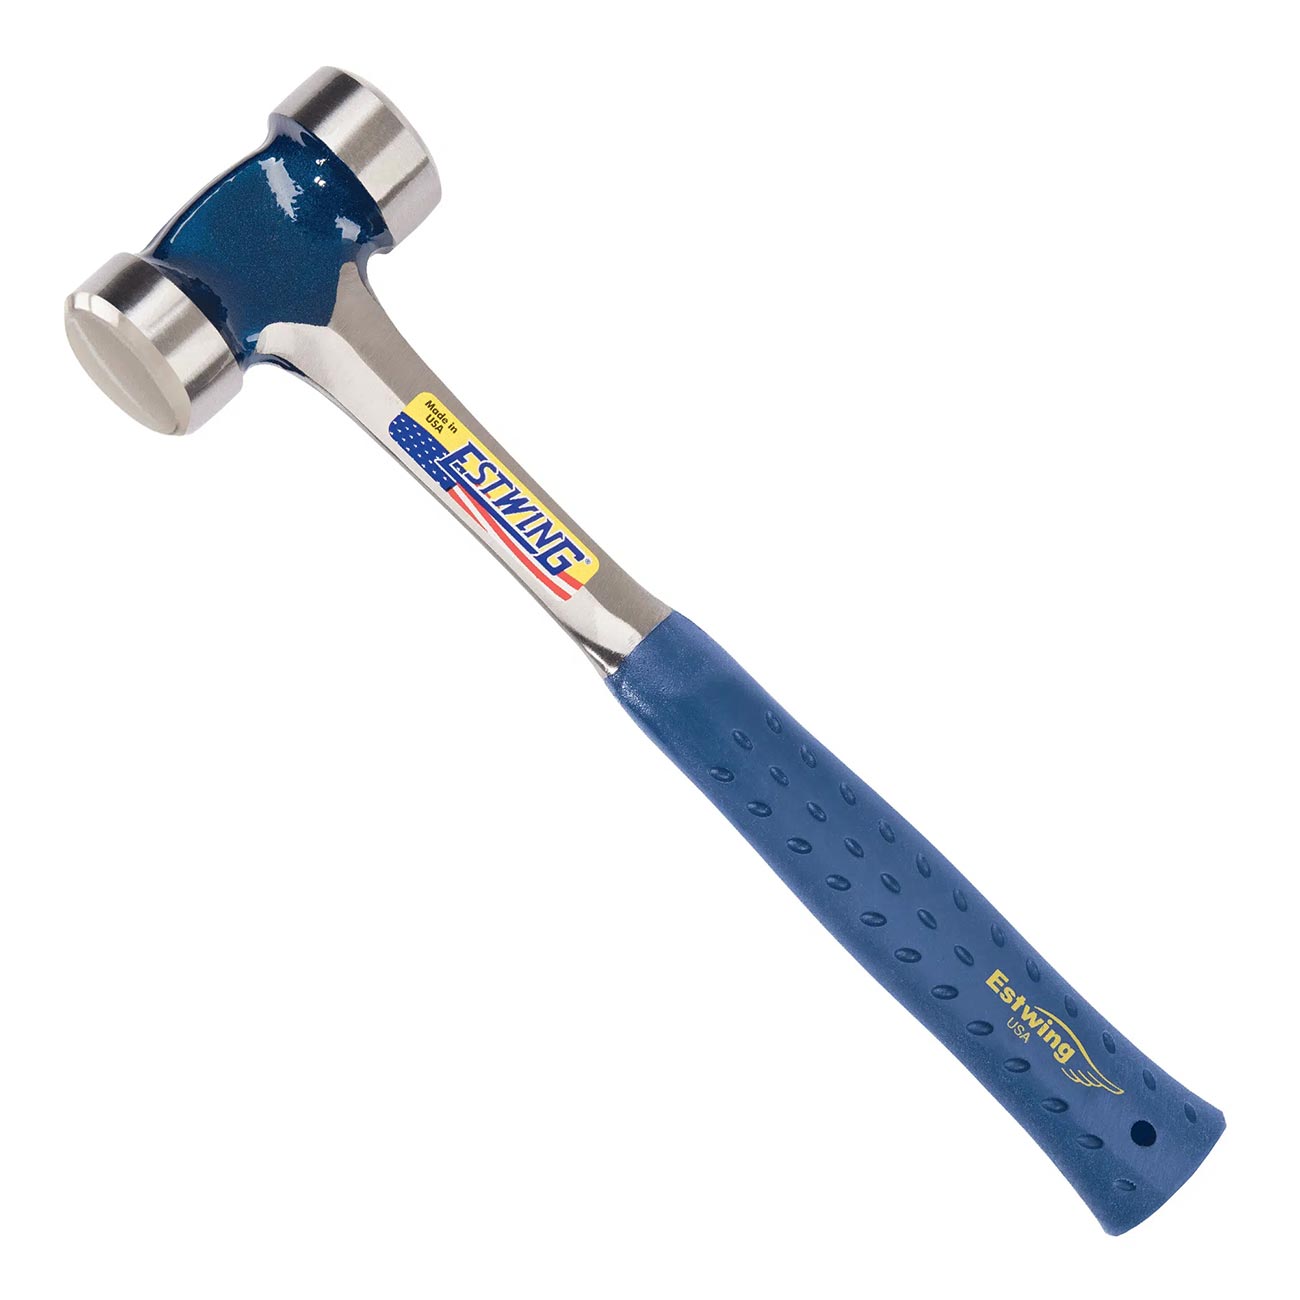 Estwing 40 oz. Smooth Face Lineman's Hammer with Blue Shock Reduction Grip